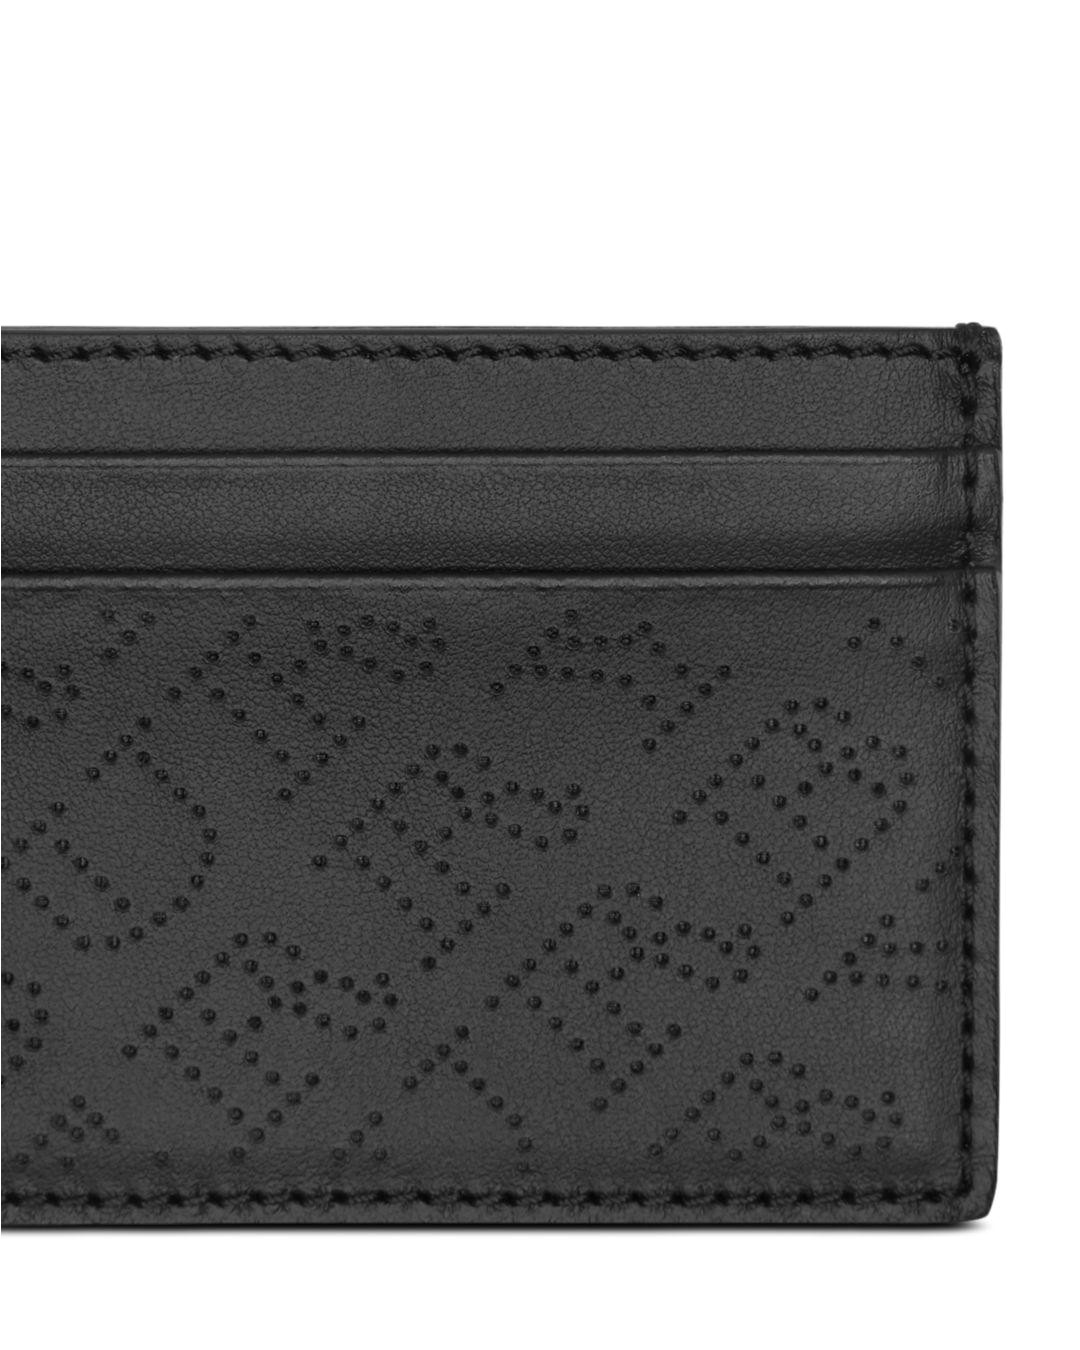 burberry black perforated logo leather card case jpeg